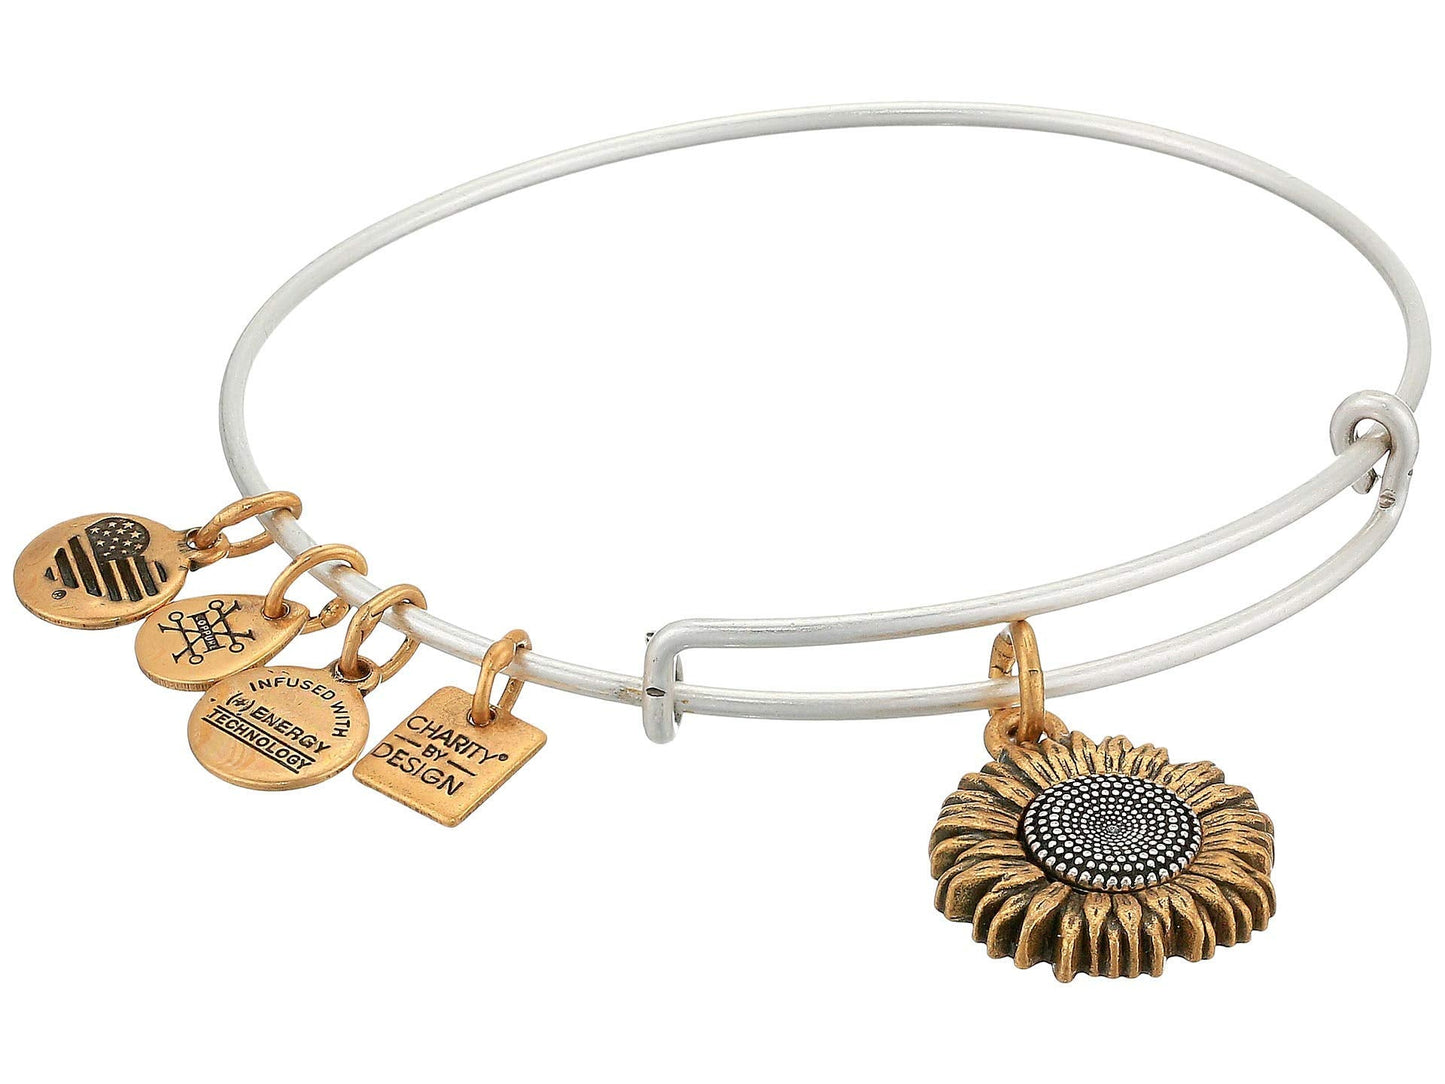 Alex and Ani Tokens Expandable Bangle for Women